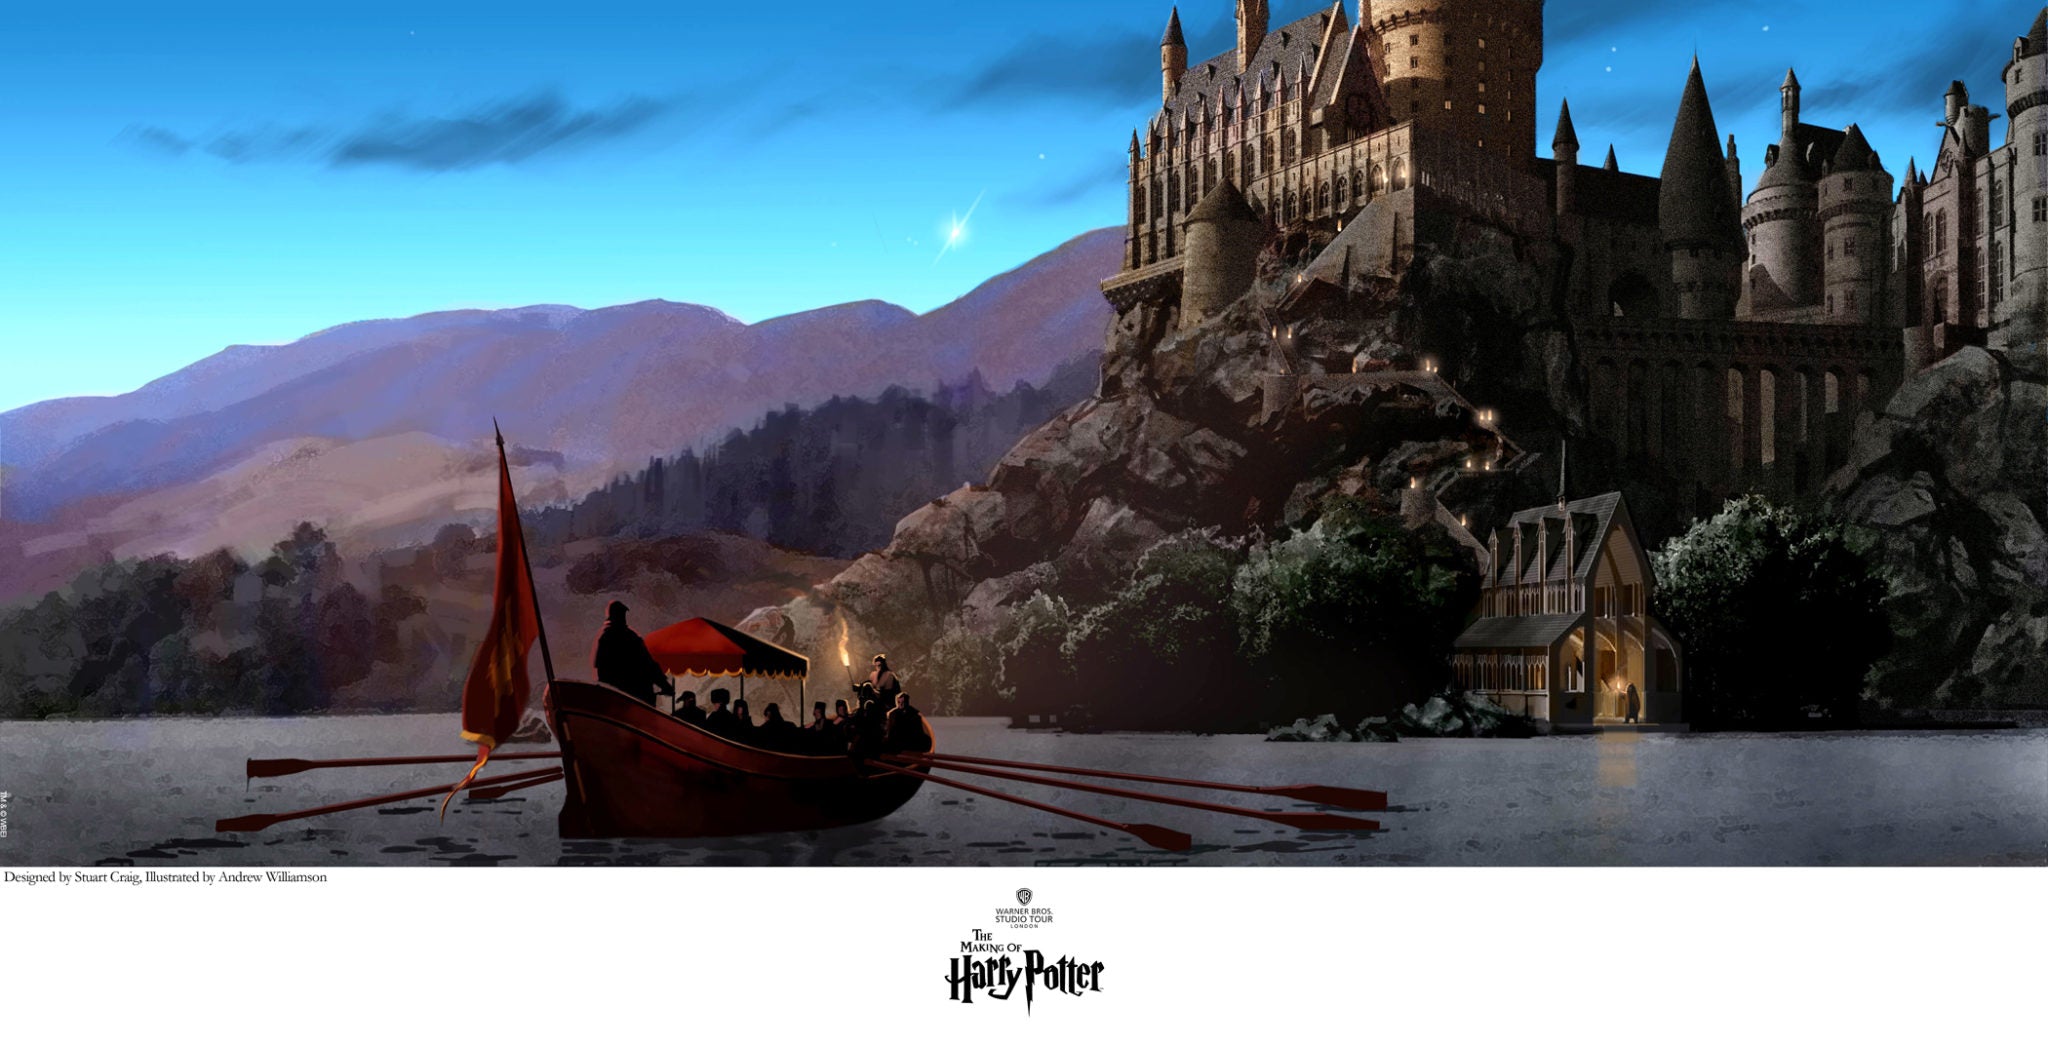 Students headed to Hogwarts castle by boat.